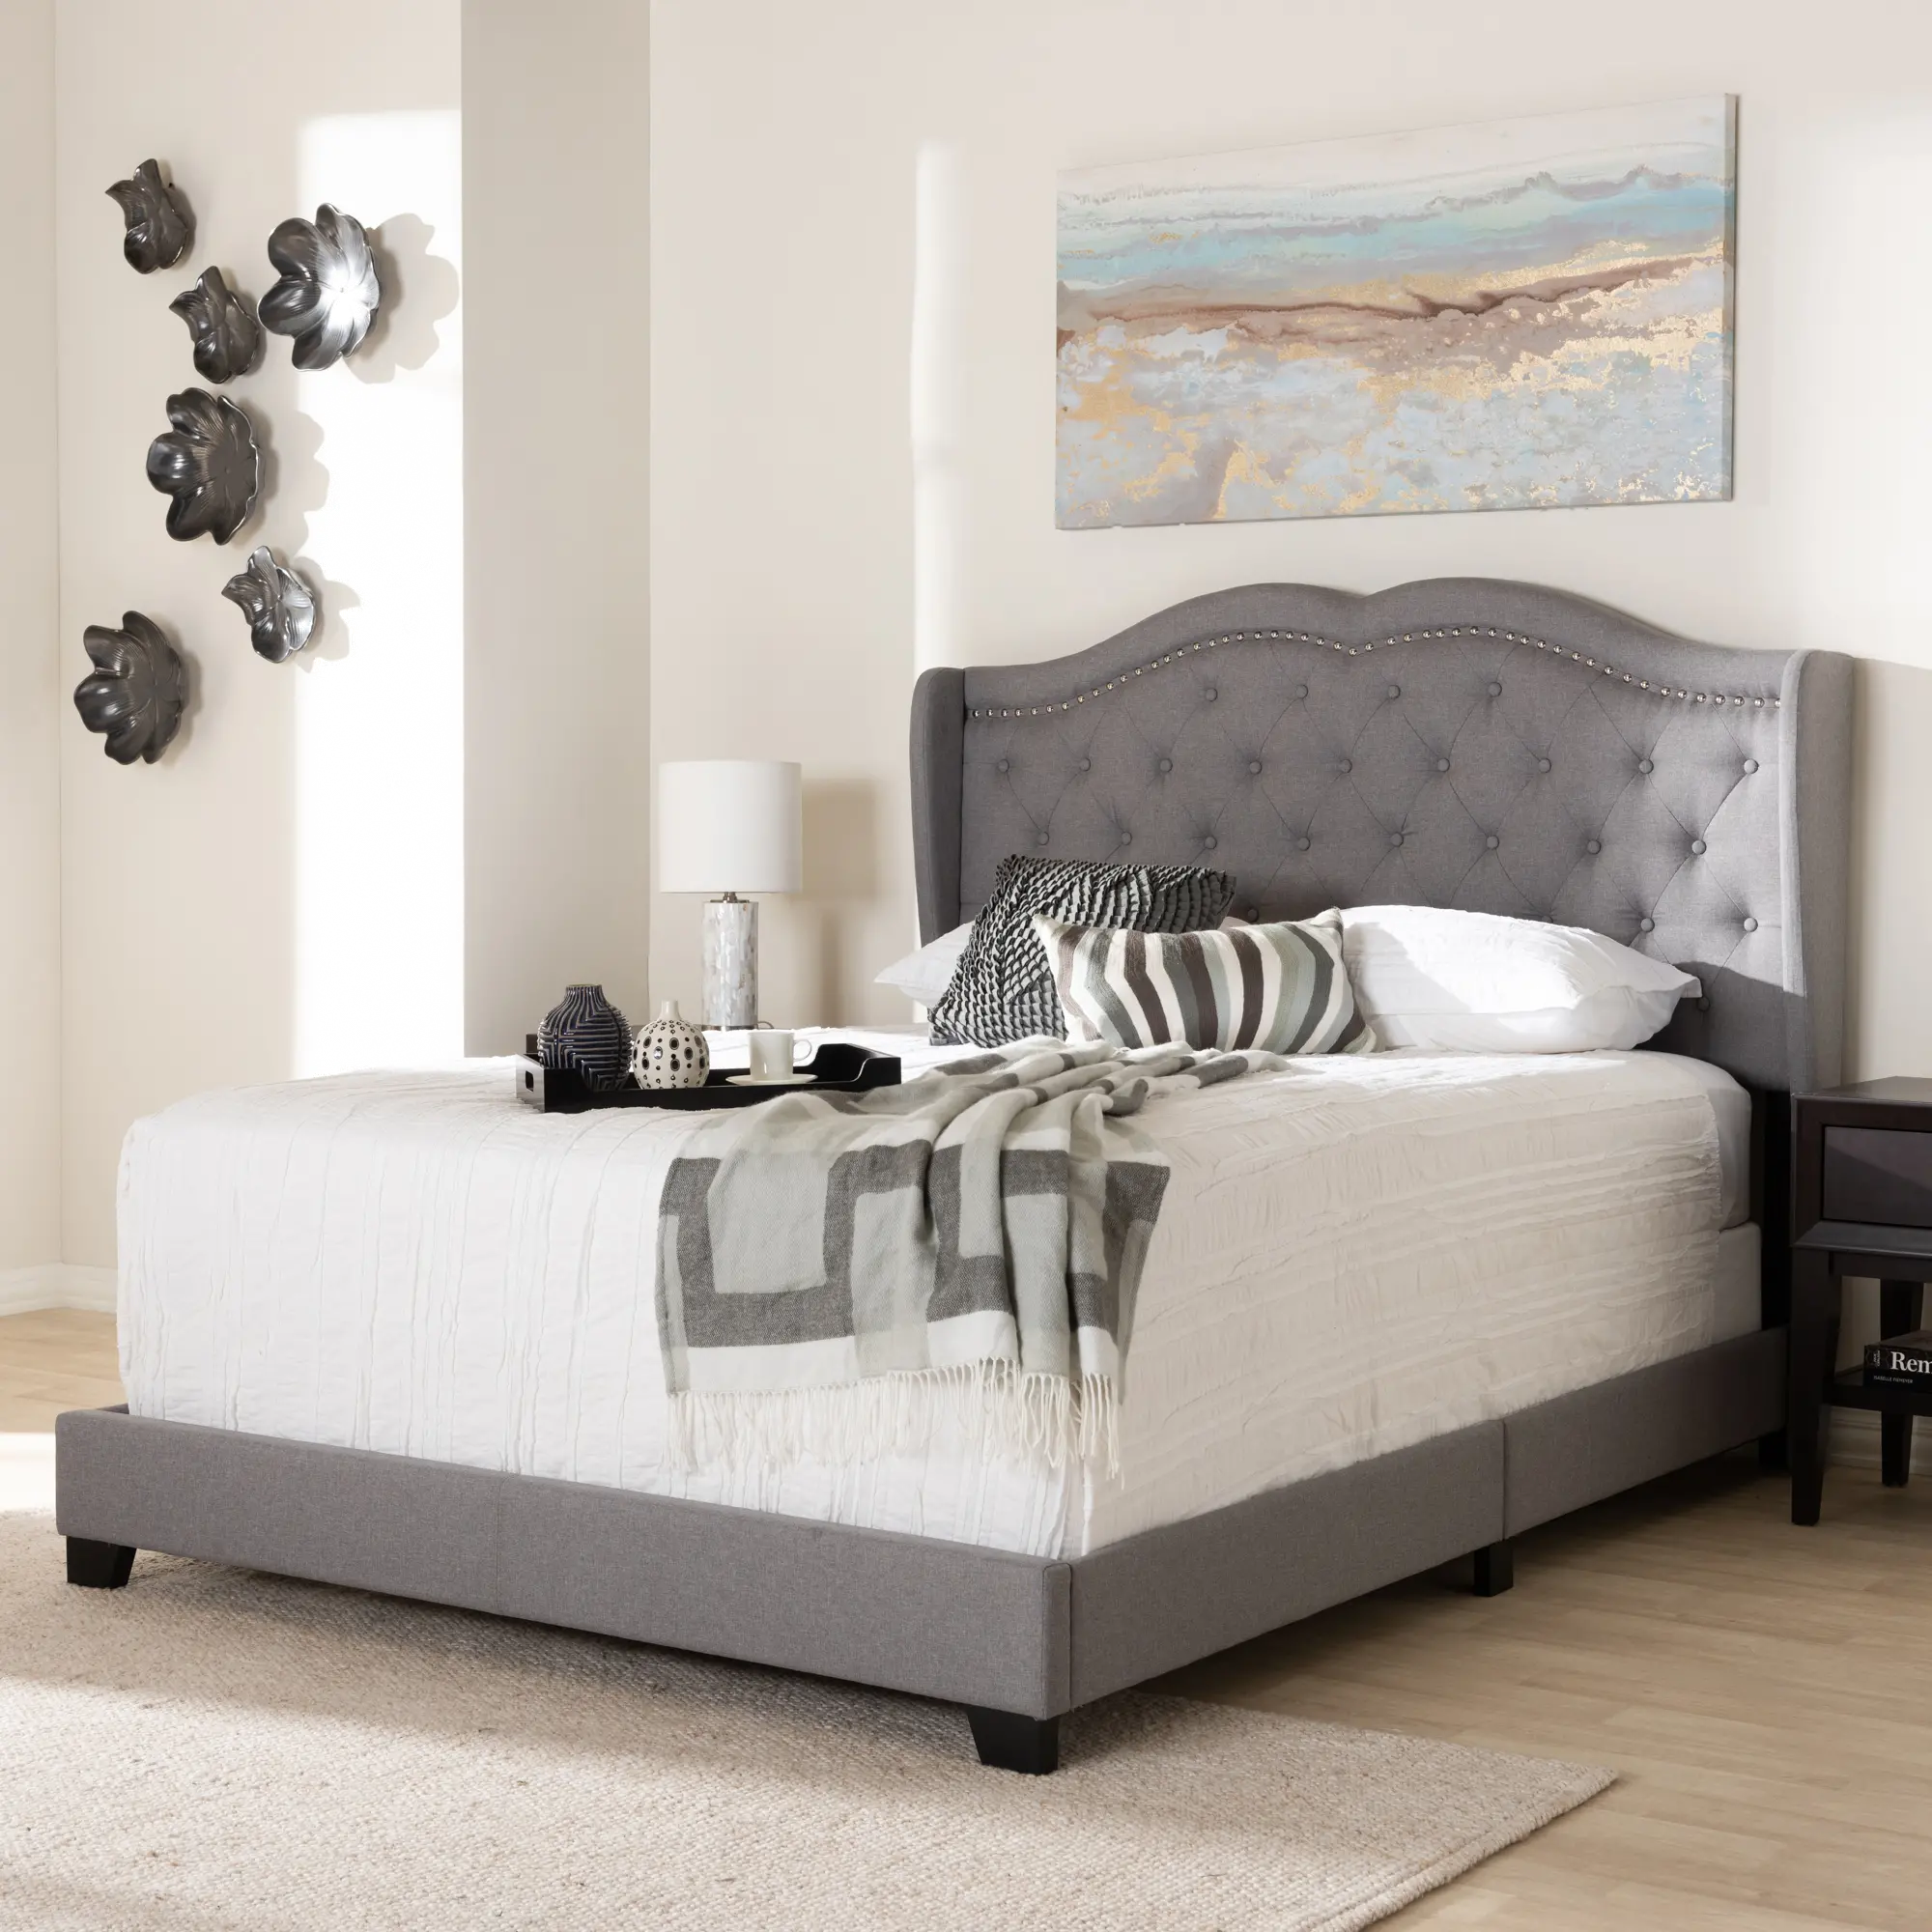 149-8923-RCW Contemporary Light Gray Upholstered Full Bed - Lai sku 149-8923-RCW